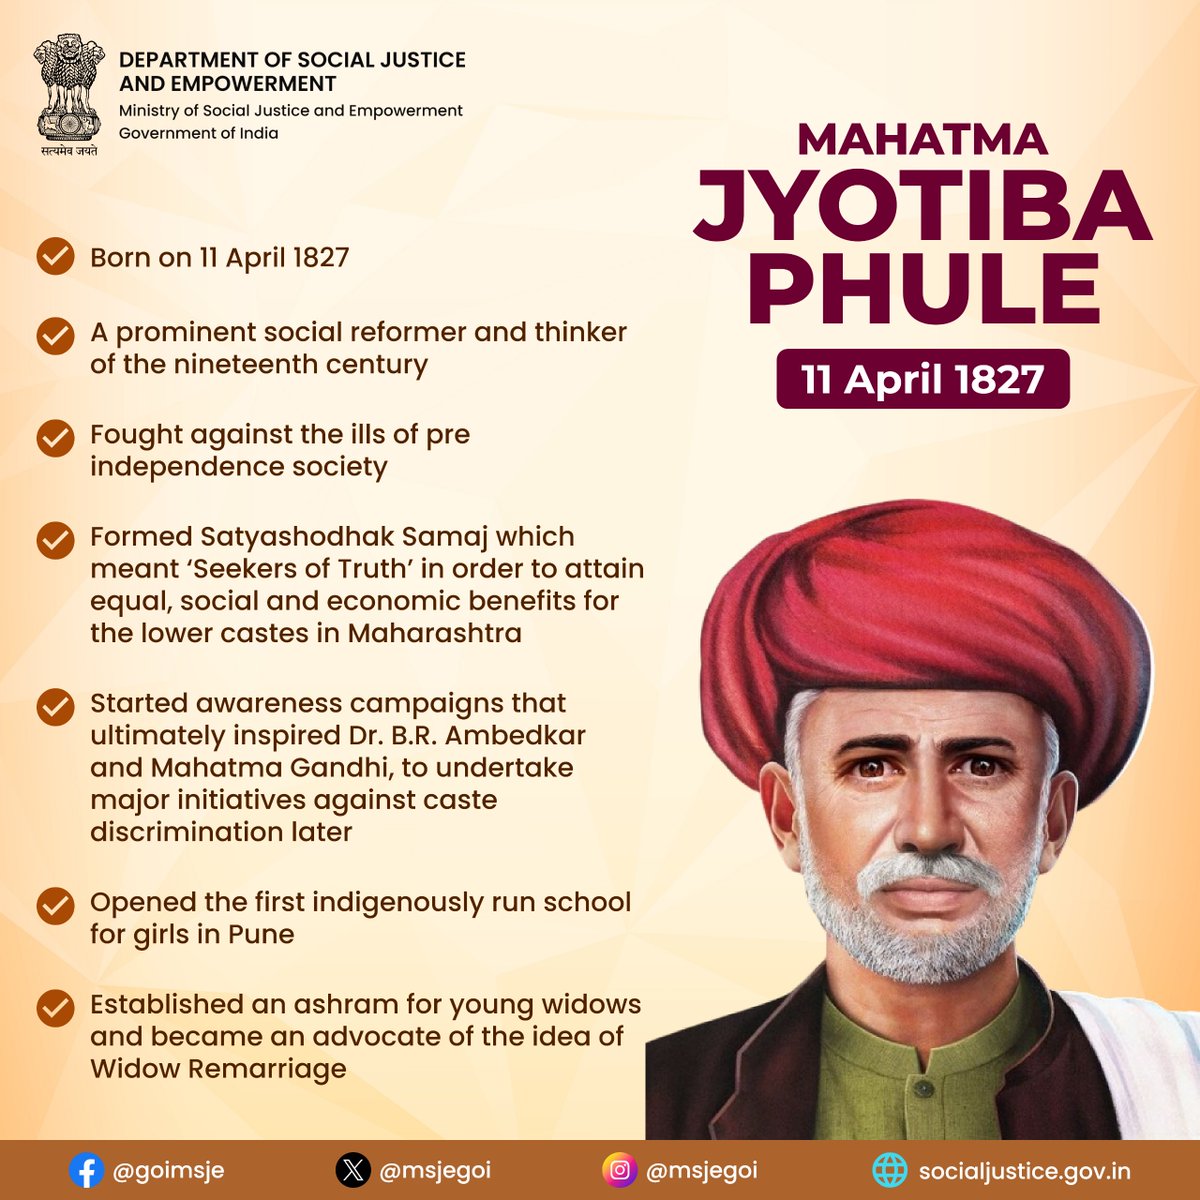 'Remembering the visionary social reformer Jyotirao Phule on his Jayanti today. His legacy of empowerment, equality, and education continues to inspire generations. #JyotiraoPhuleJayanti #SocialReformer #EqualityForAll'